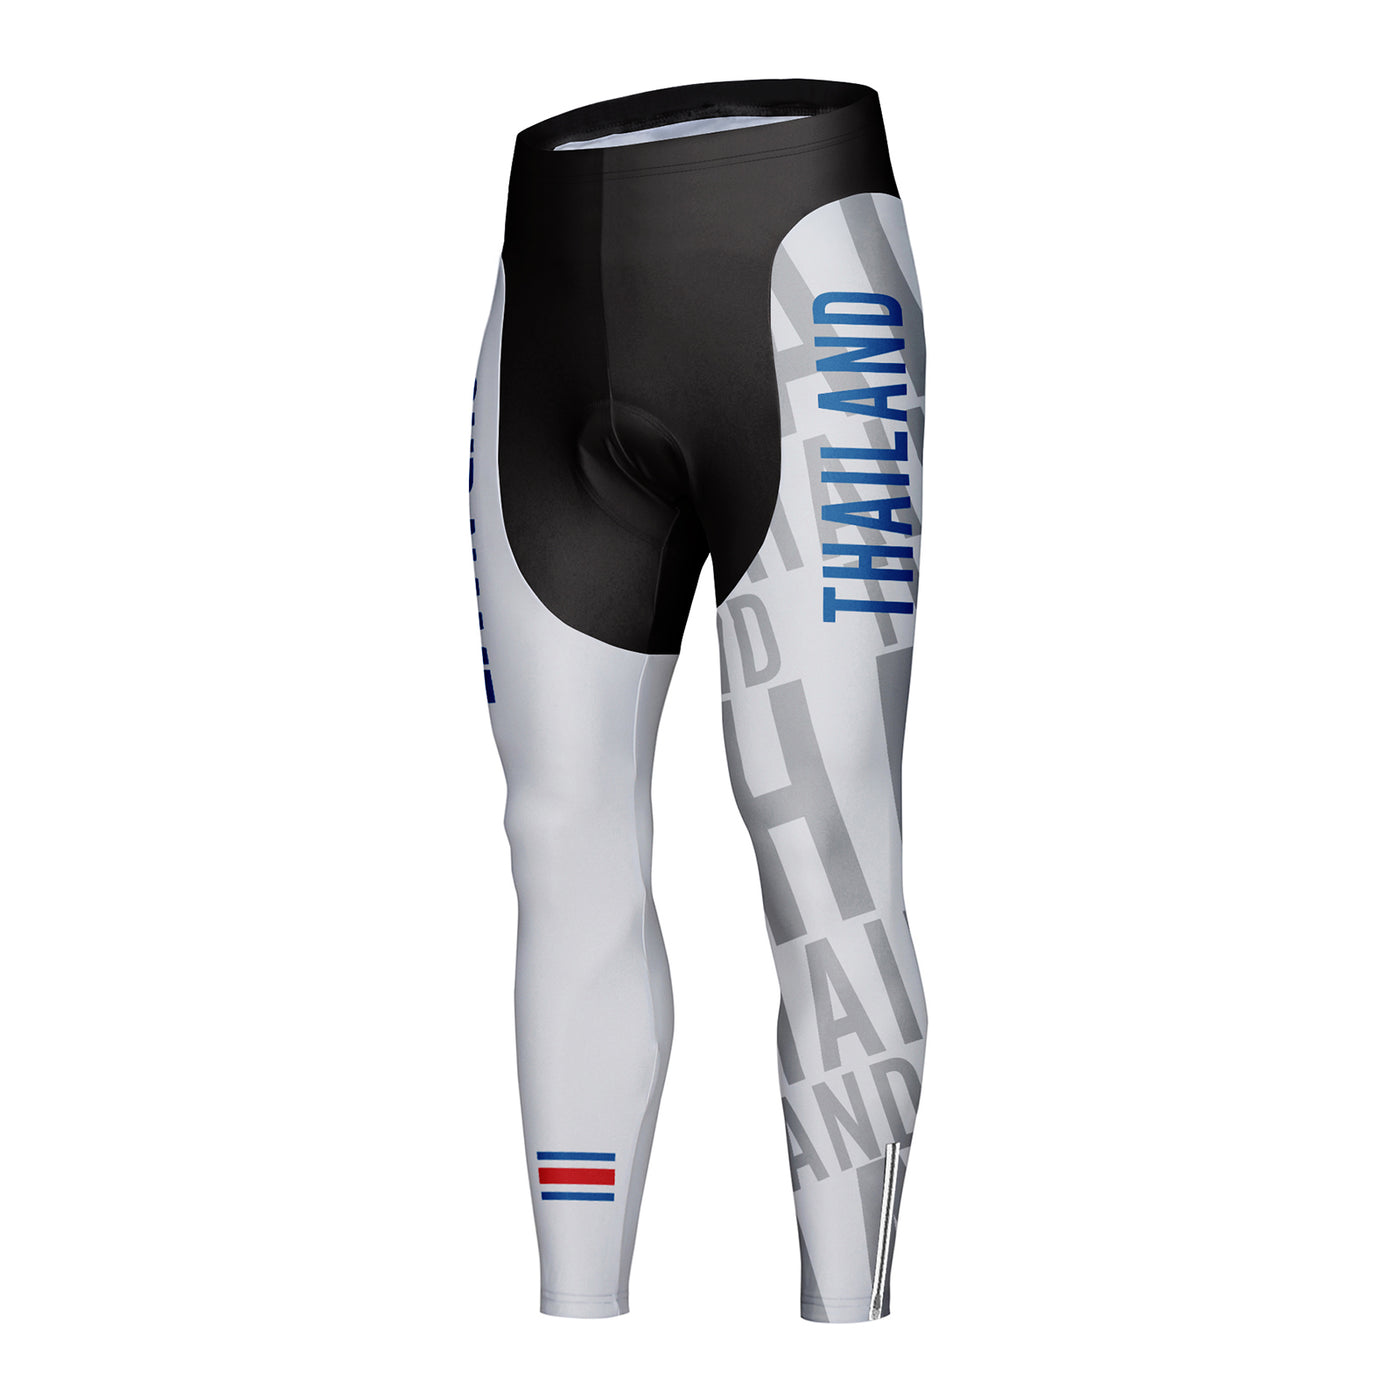 Customized Thailand Unisex Cycling Tights Long Pants